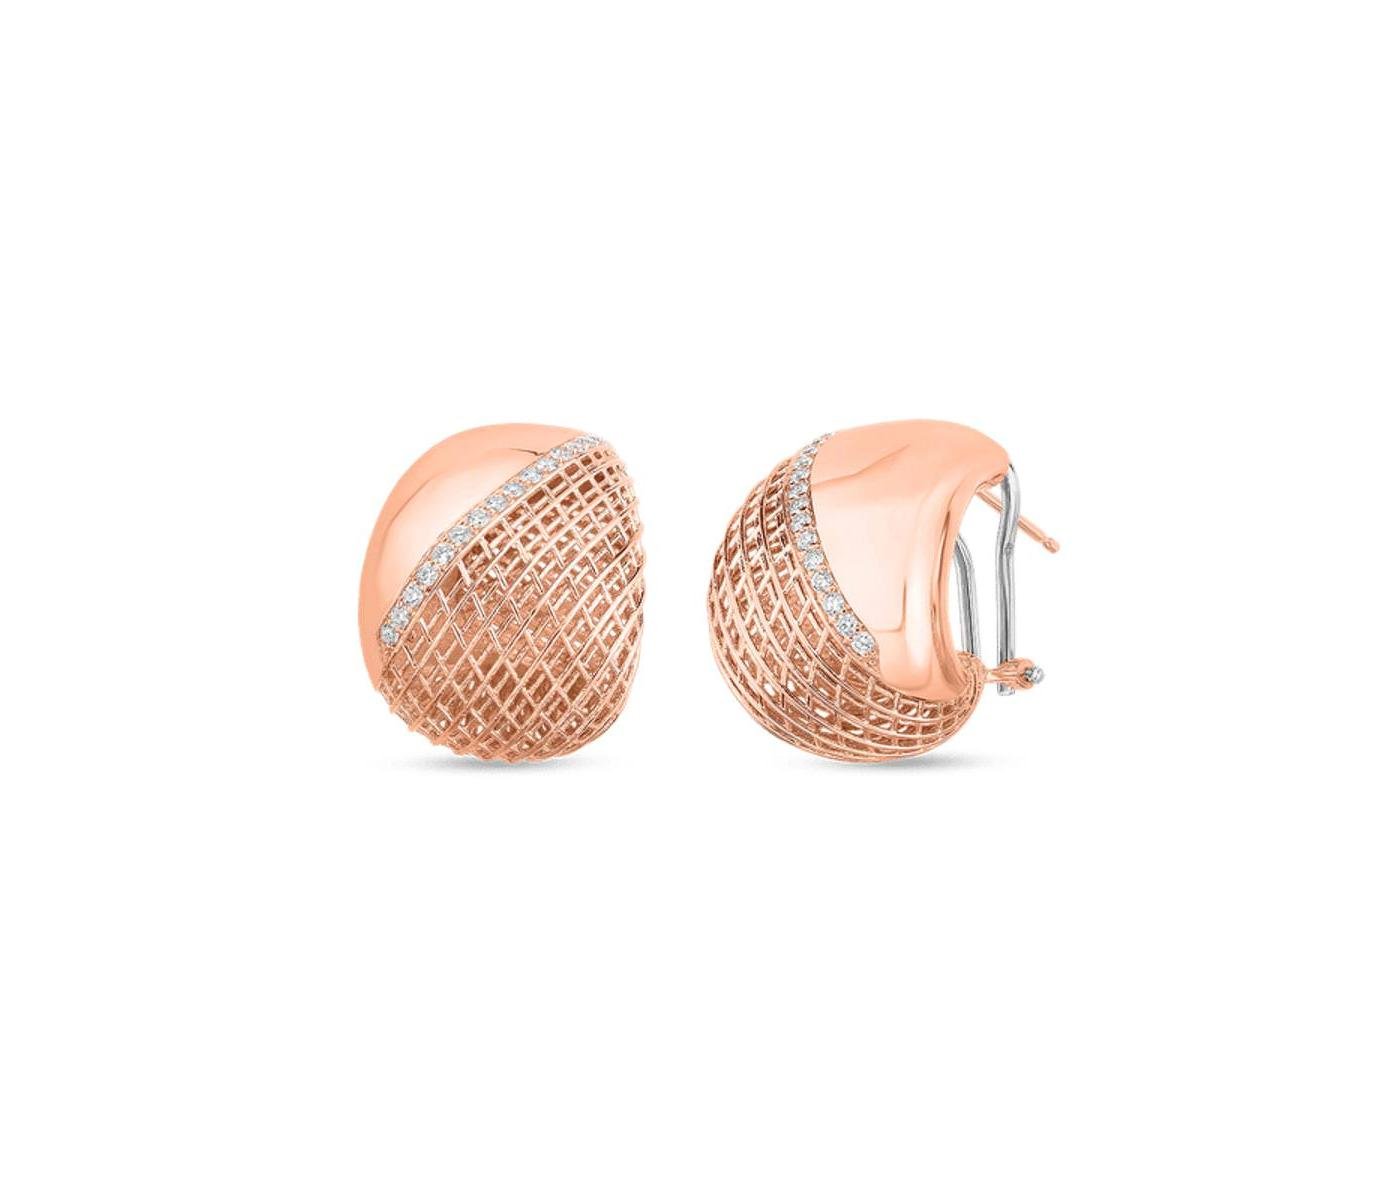 Earrings by Roberto Coin